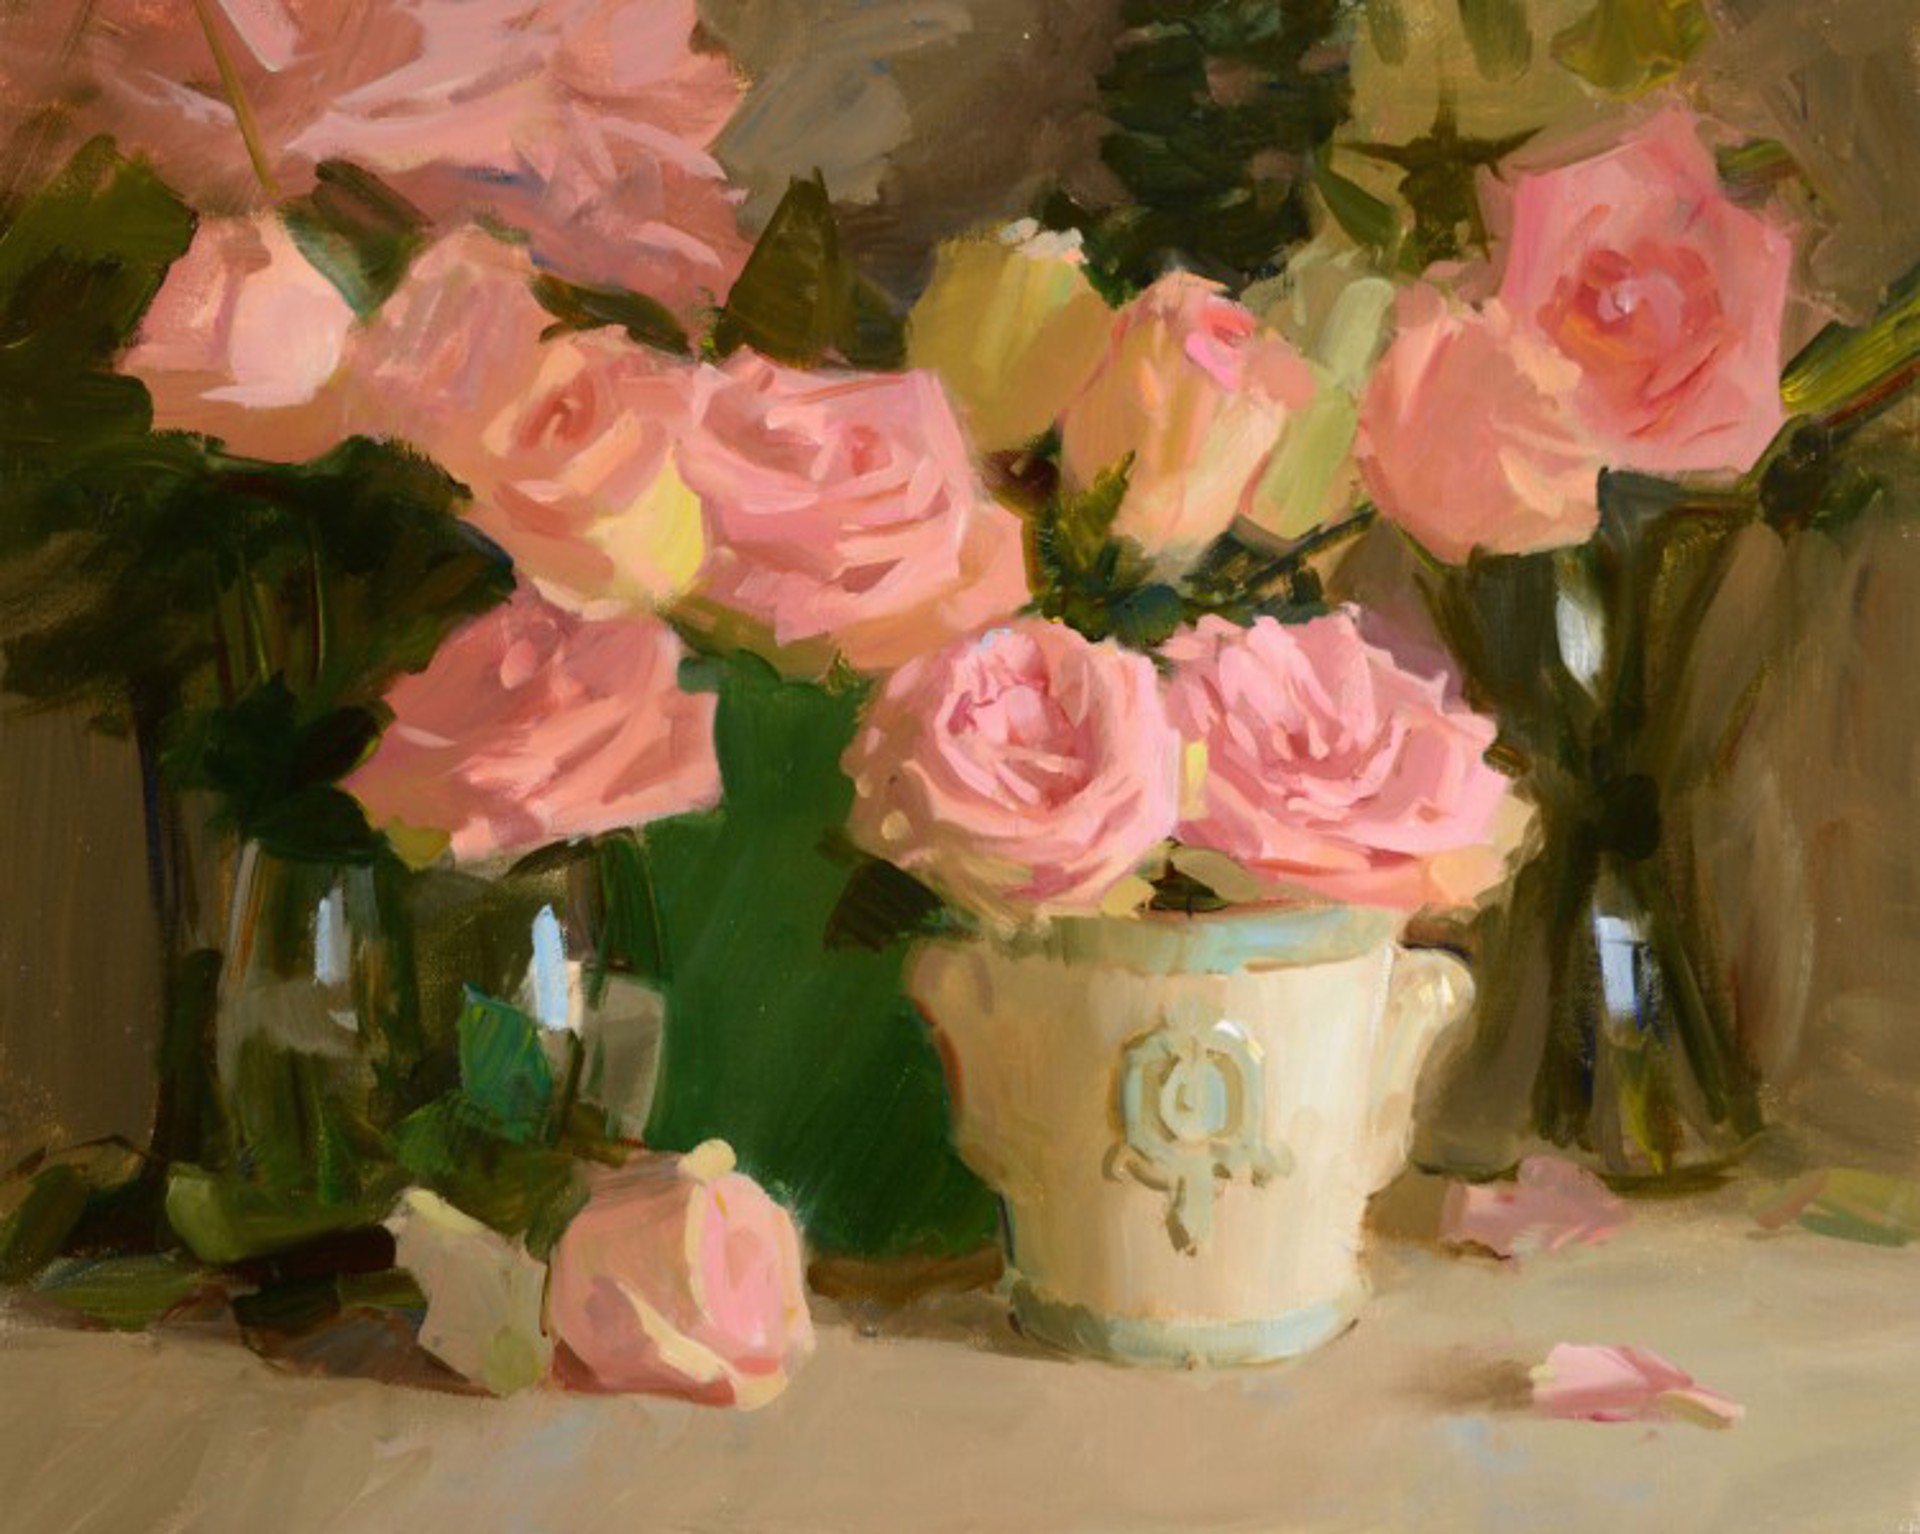 Company of Roses by Ken Cadwallader